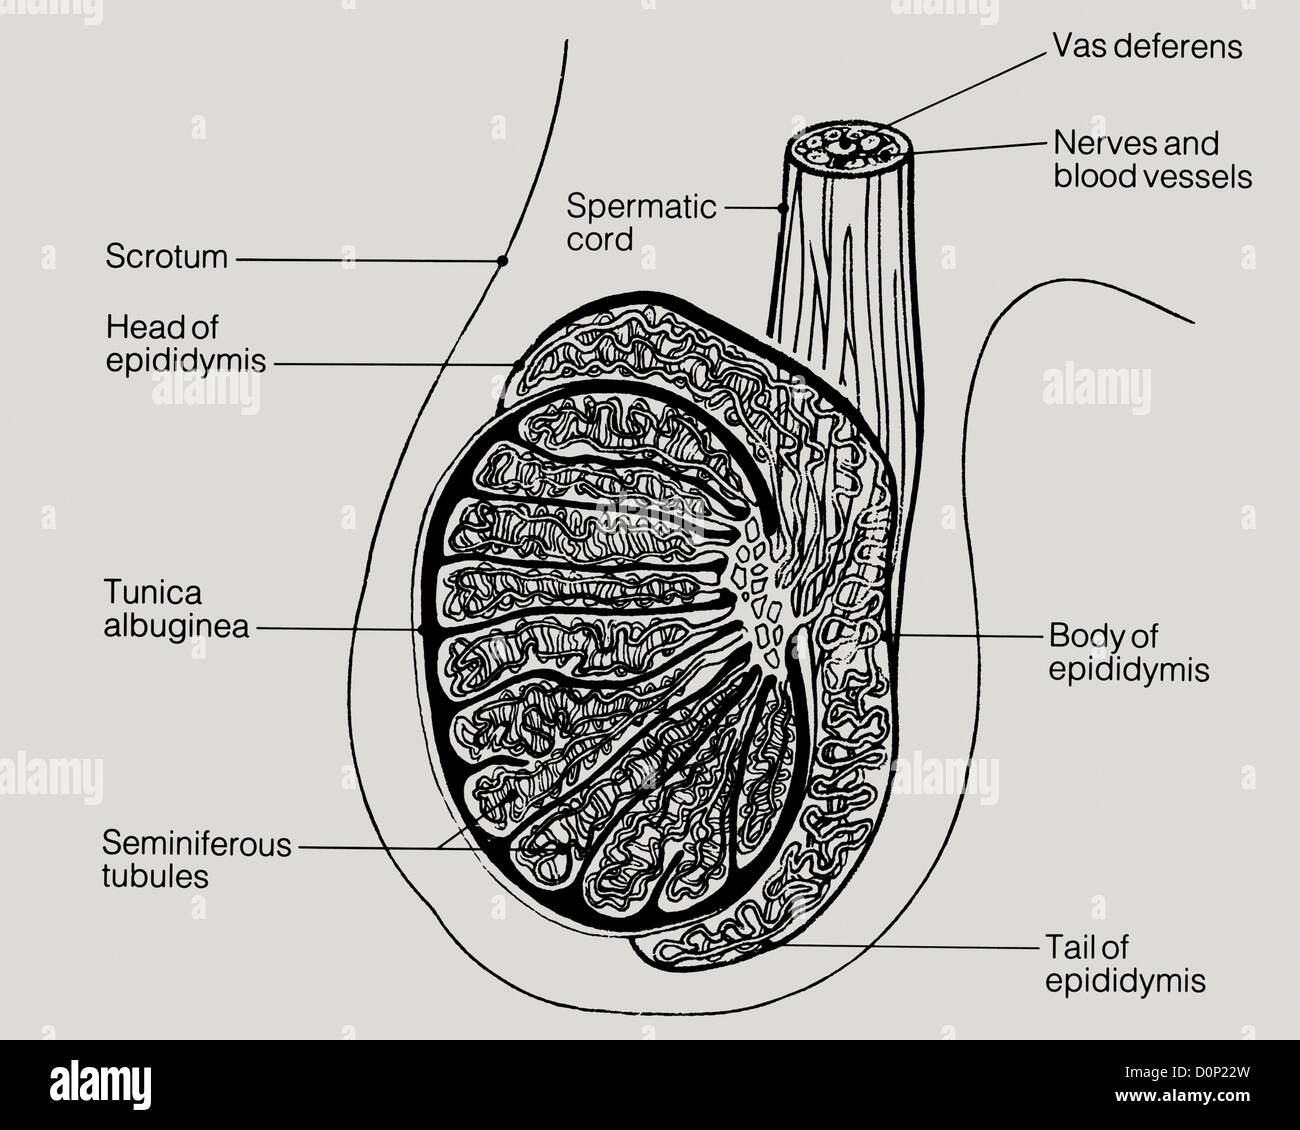 A line drawing of a lateral view of human testicles, including the scrotum, epididymis, and vas deferens. Stock Photo